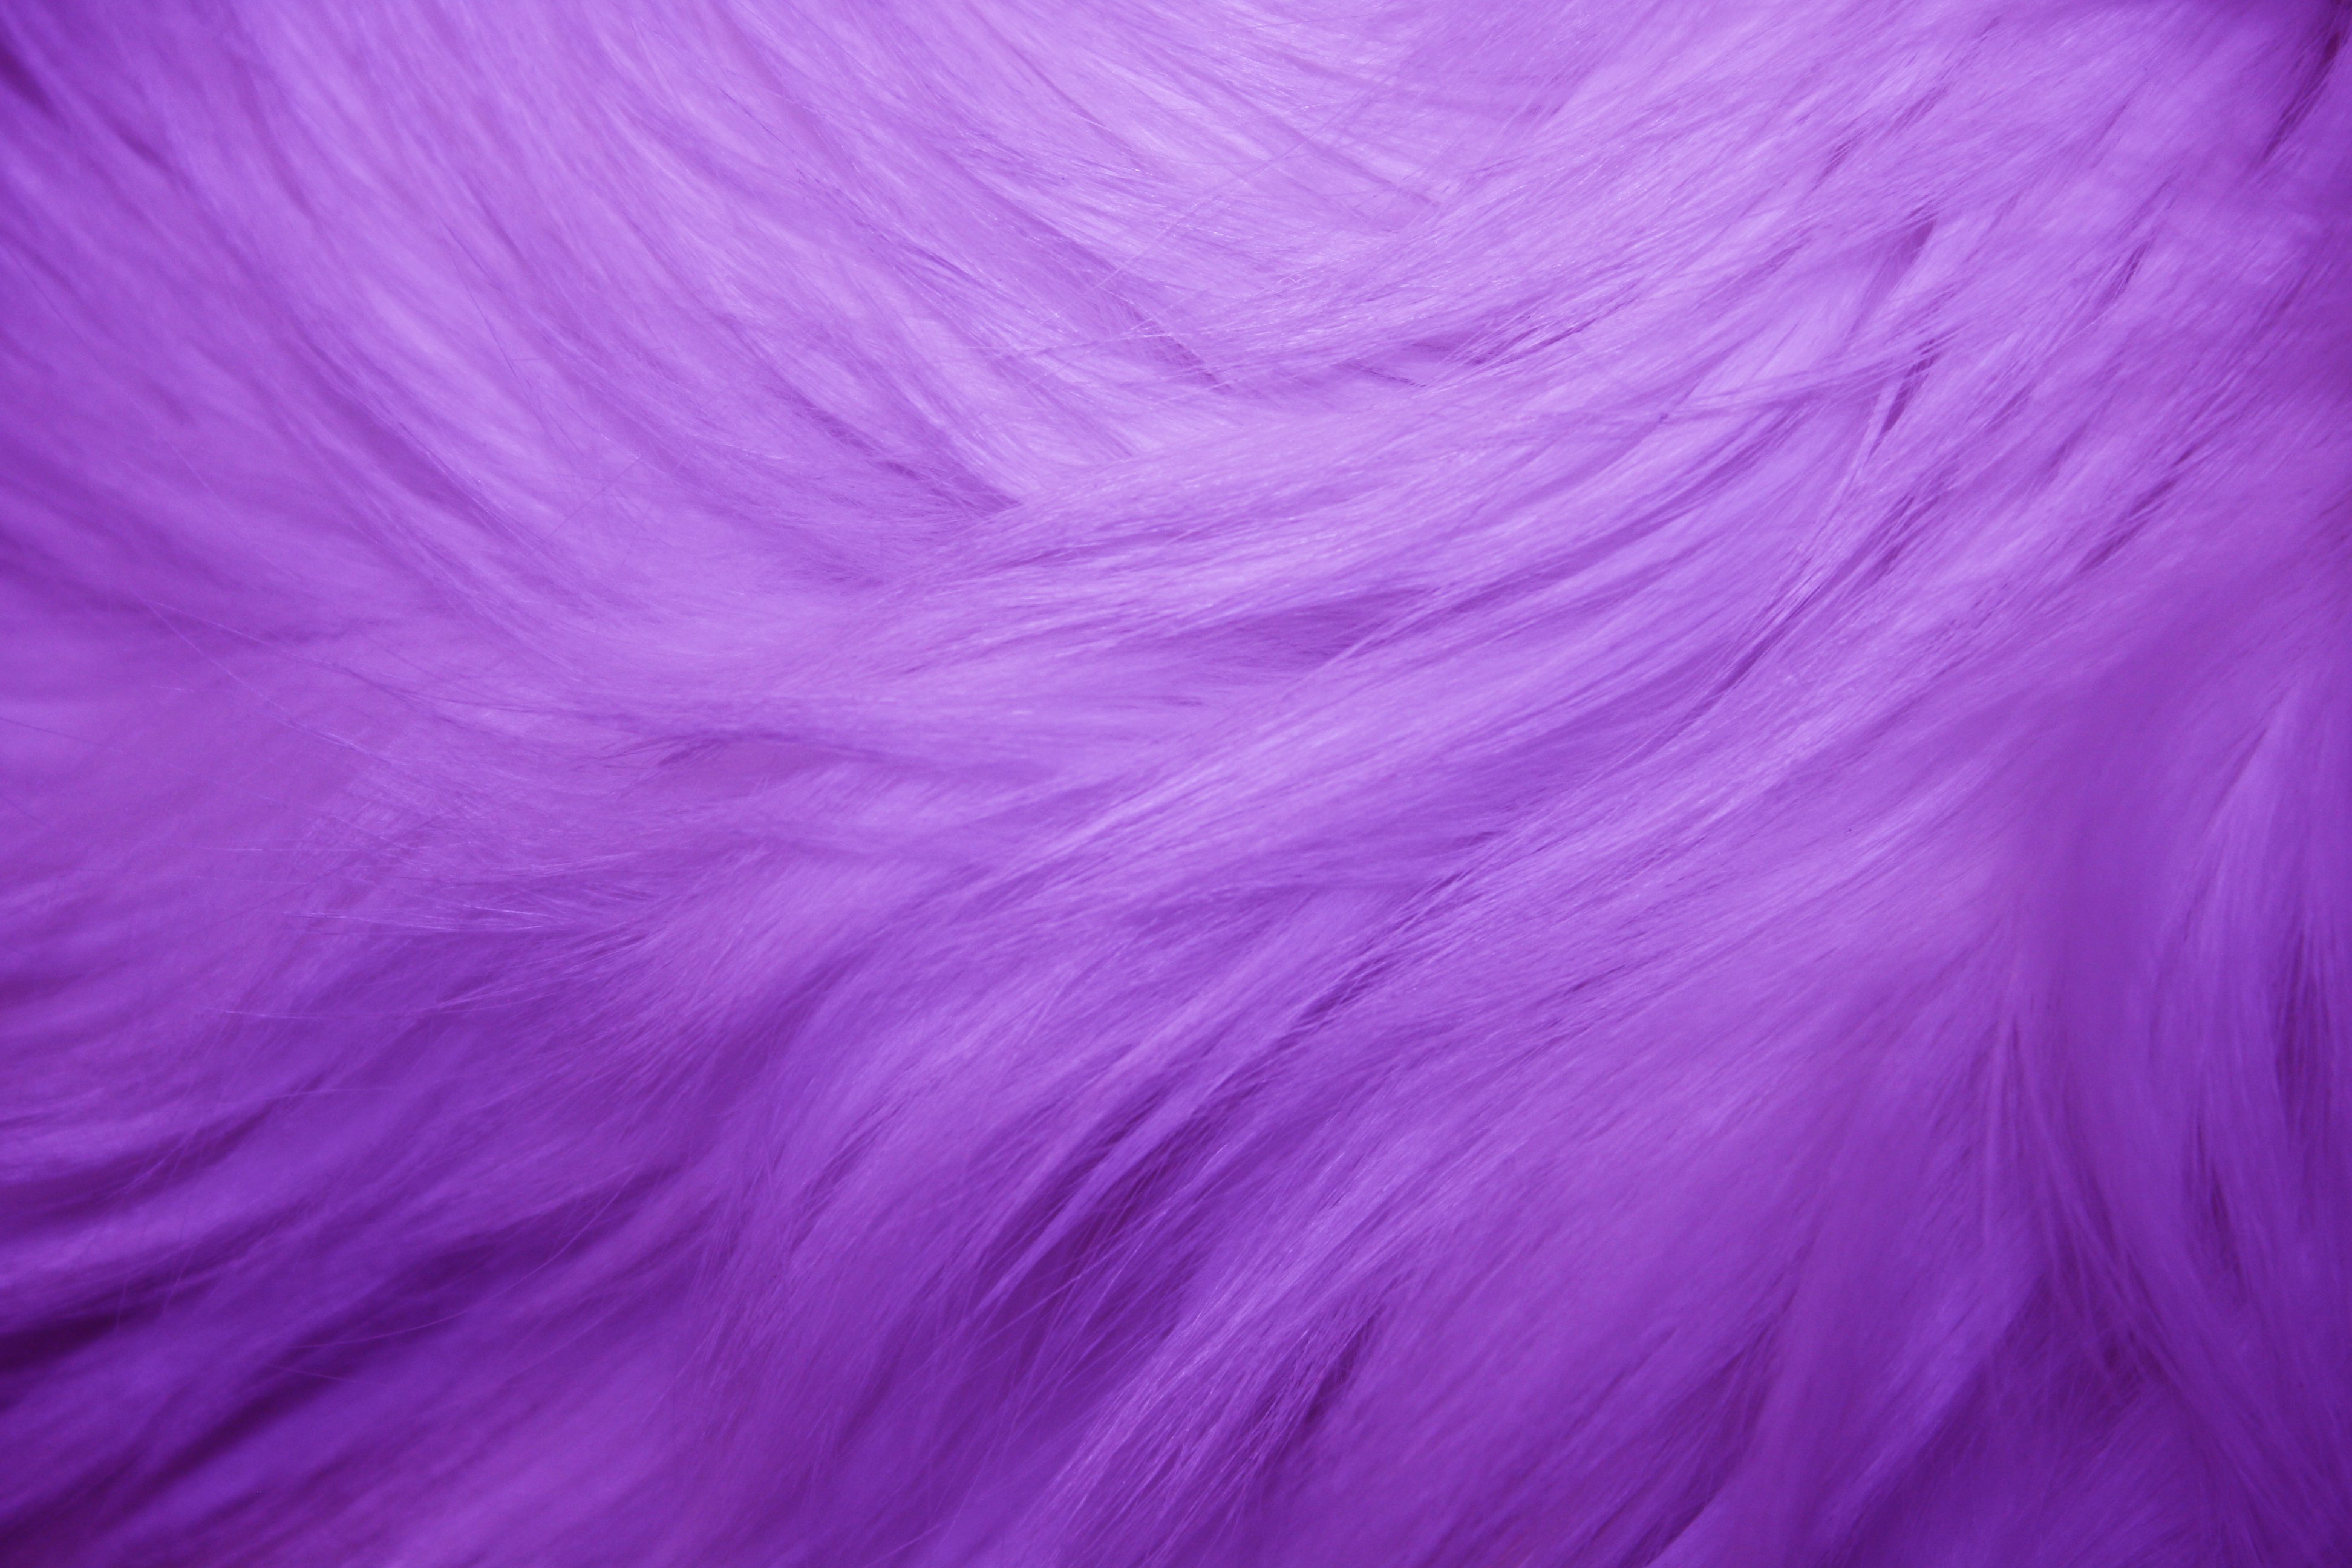 Pink Fur Texture Picture, Free Photograph